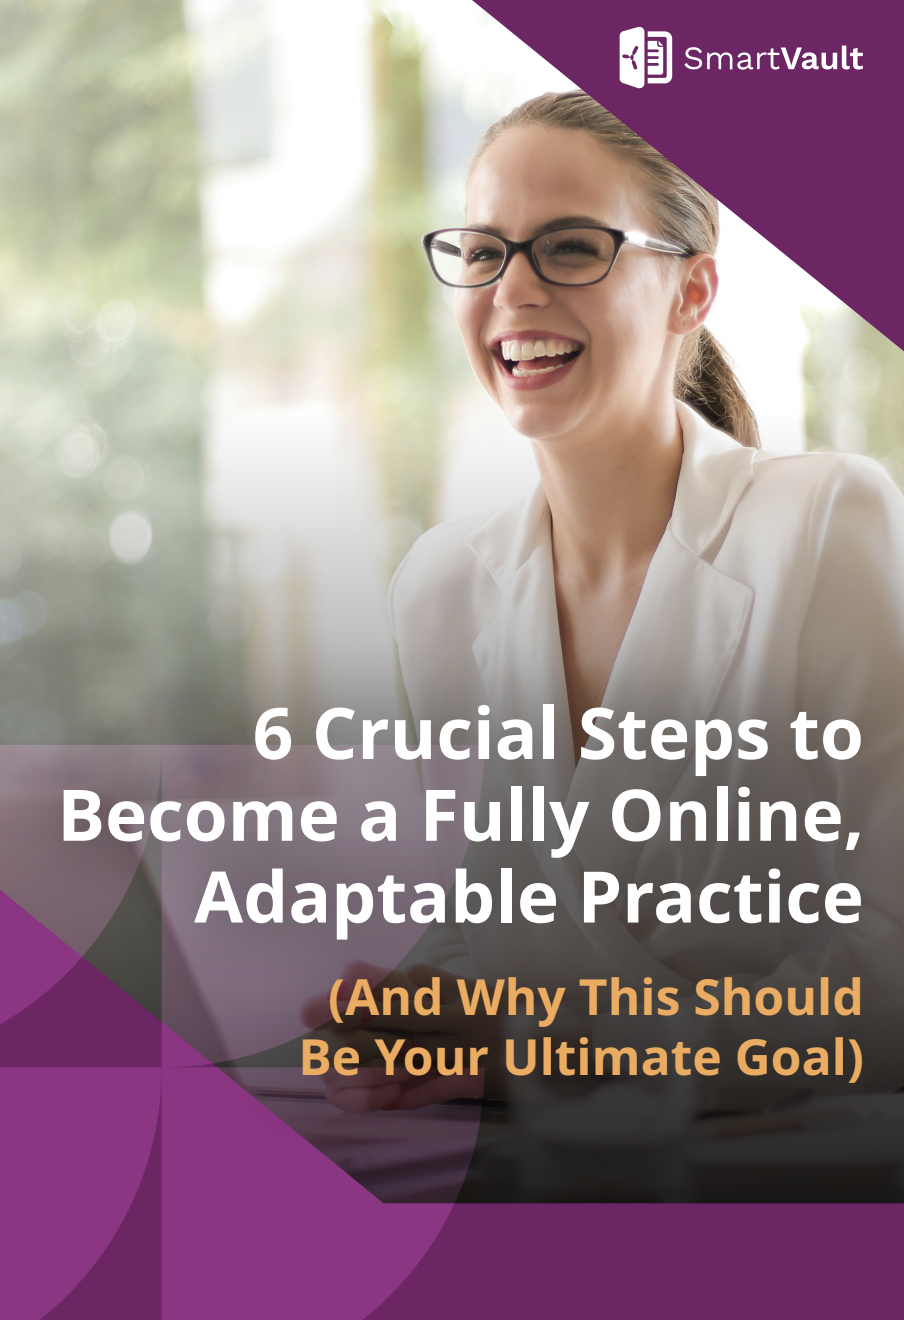 6 Crucial Steps to Become a Fully Online, Adaptable Practice